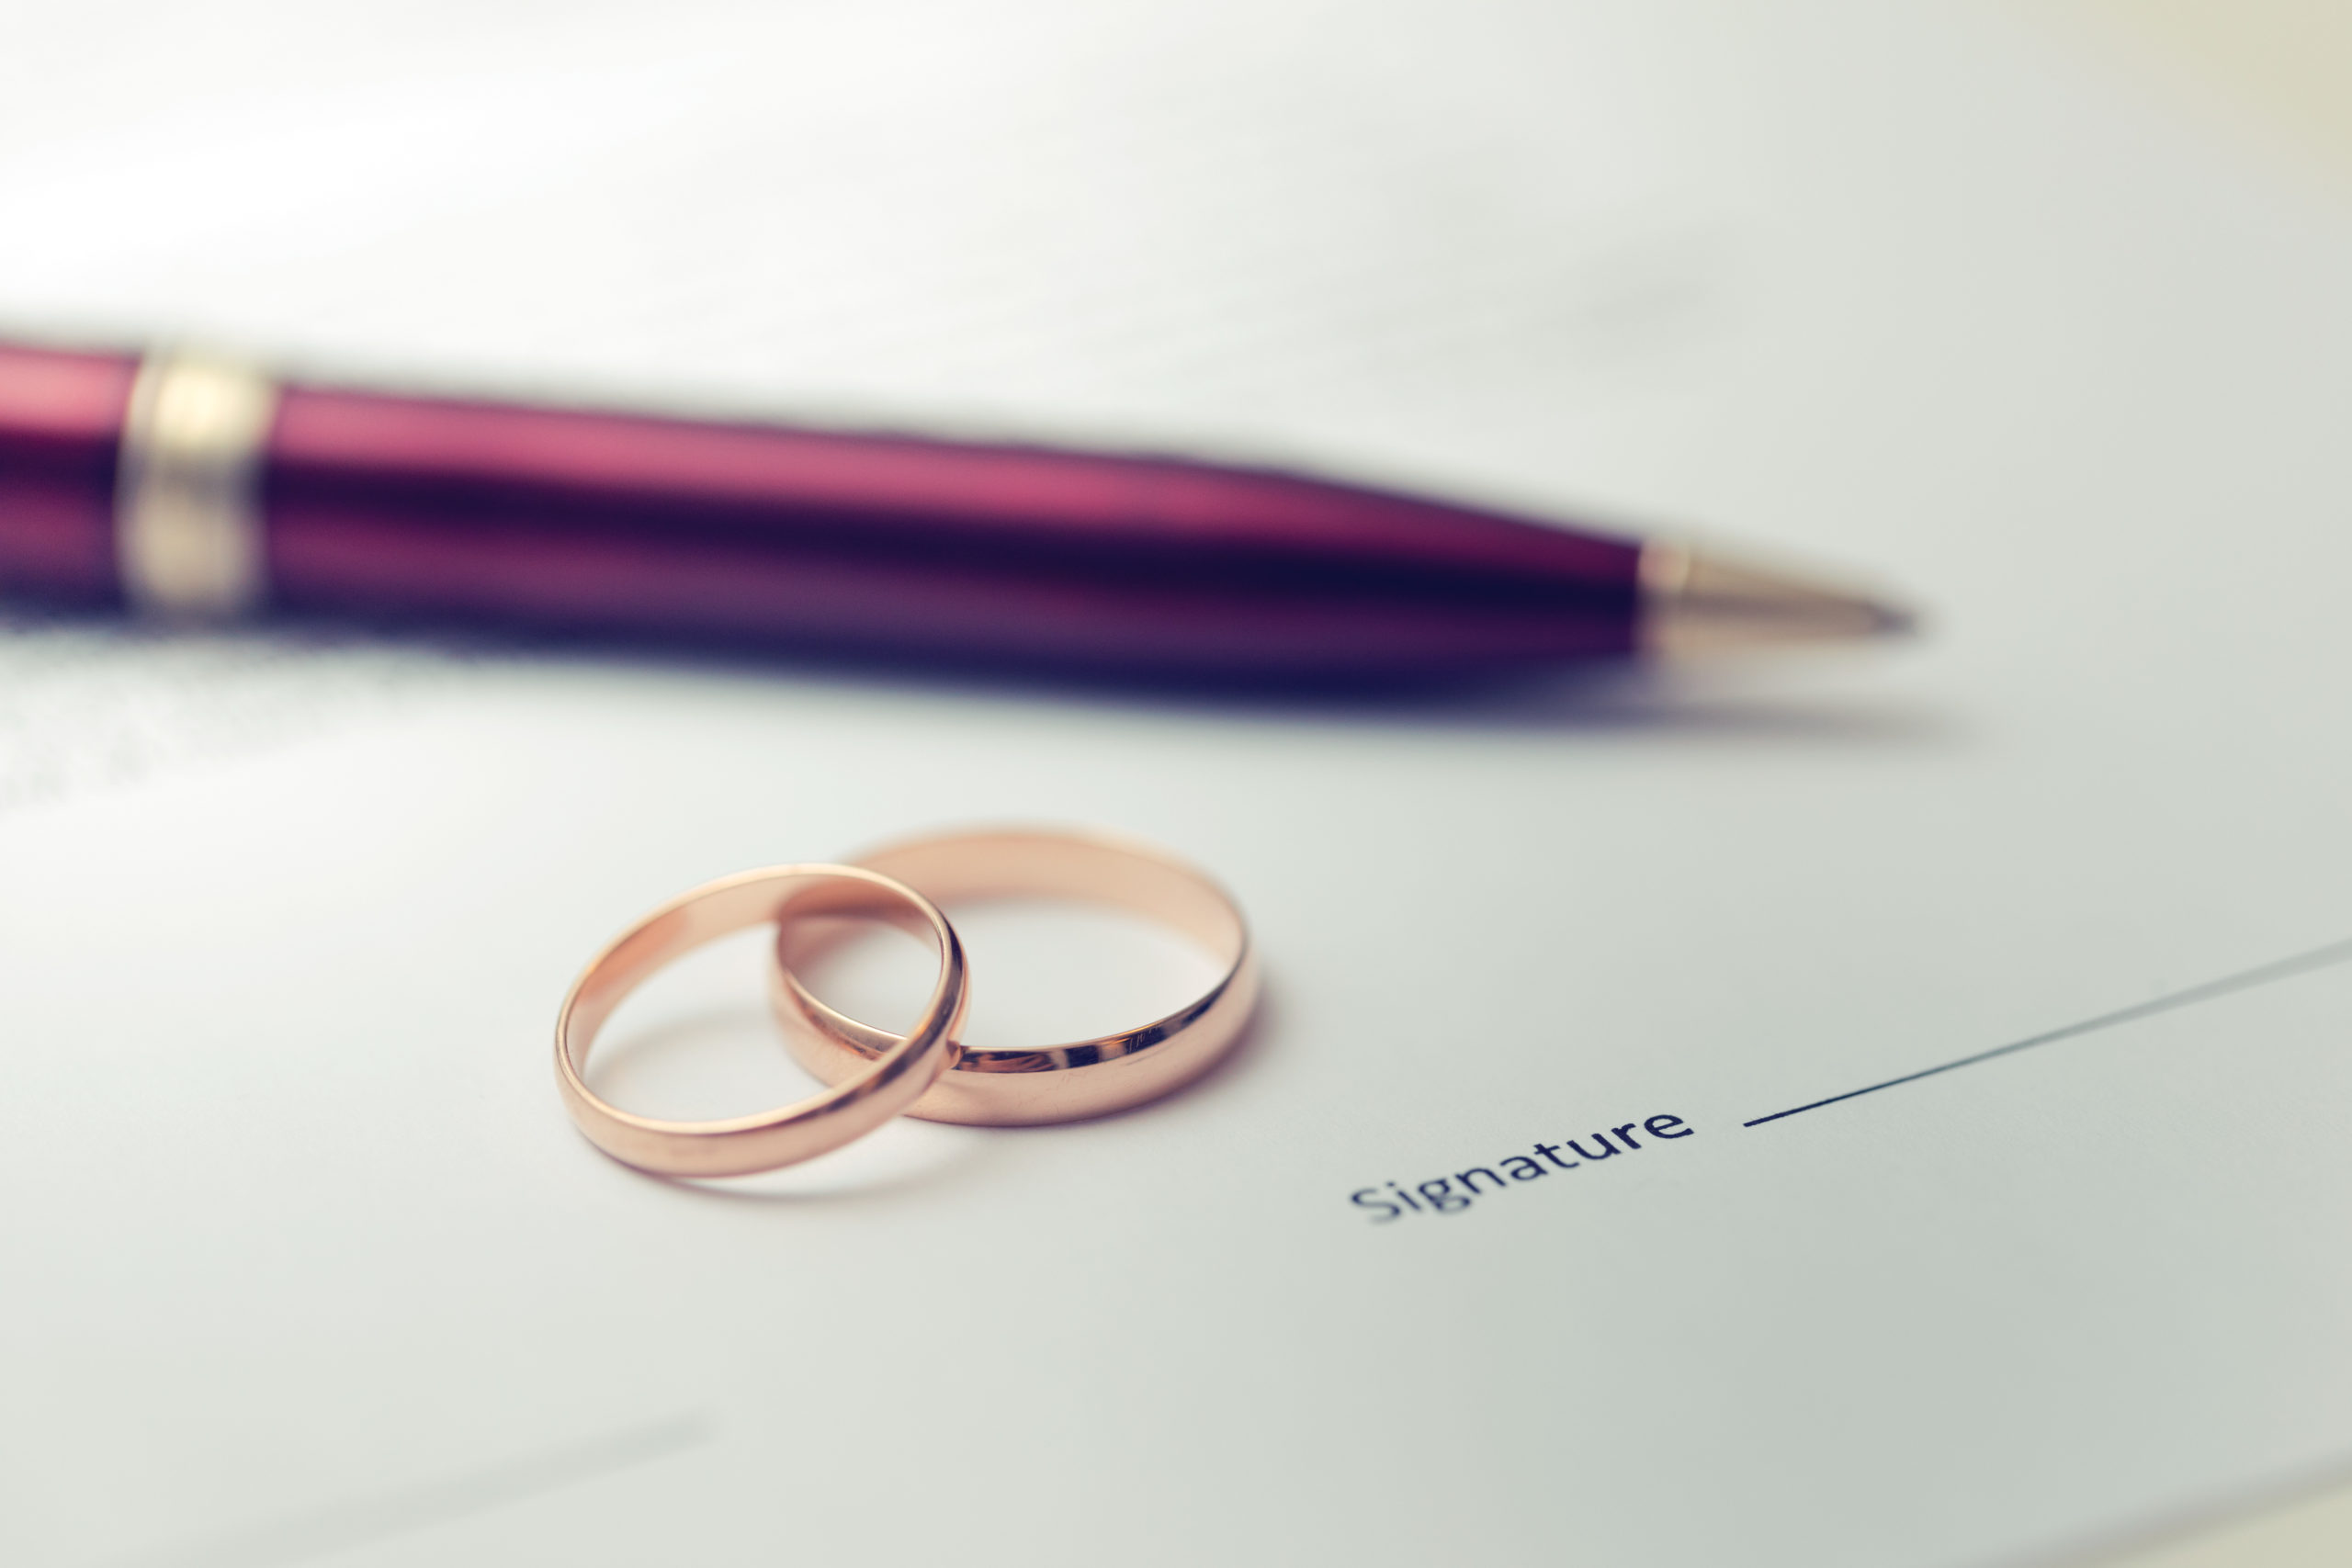 A photo representing a marriage contract, showing a purple pen, laying conveniently next to a signature line, and two stacked wedding rings.